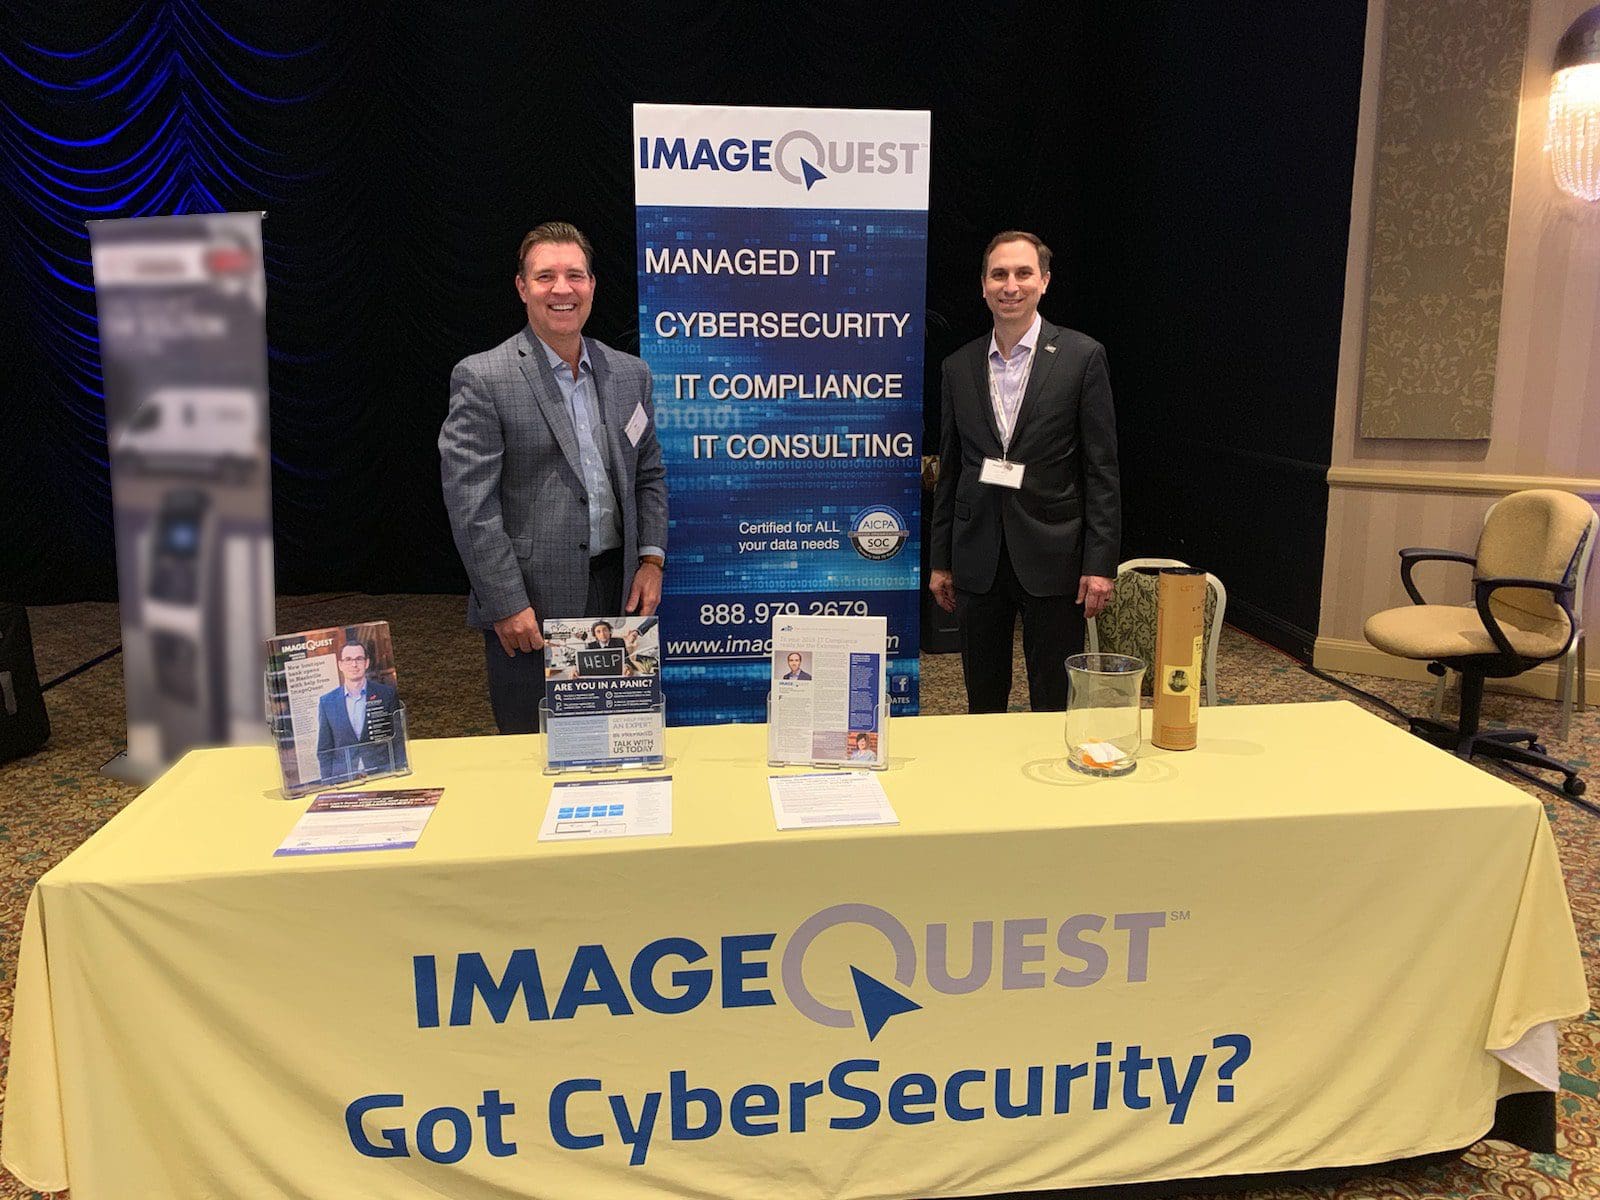 Kentucky Bankers Association, KBA Spring Conference, Milton Bartley, Jay Mallory, ImageQuest, French Lick Resort, IT Compliance, Cybersecurity, IT Security